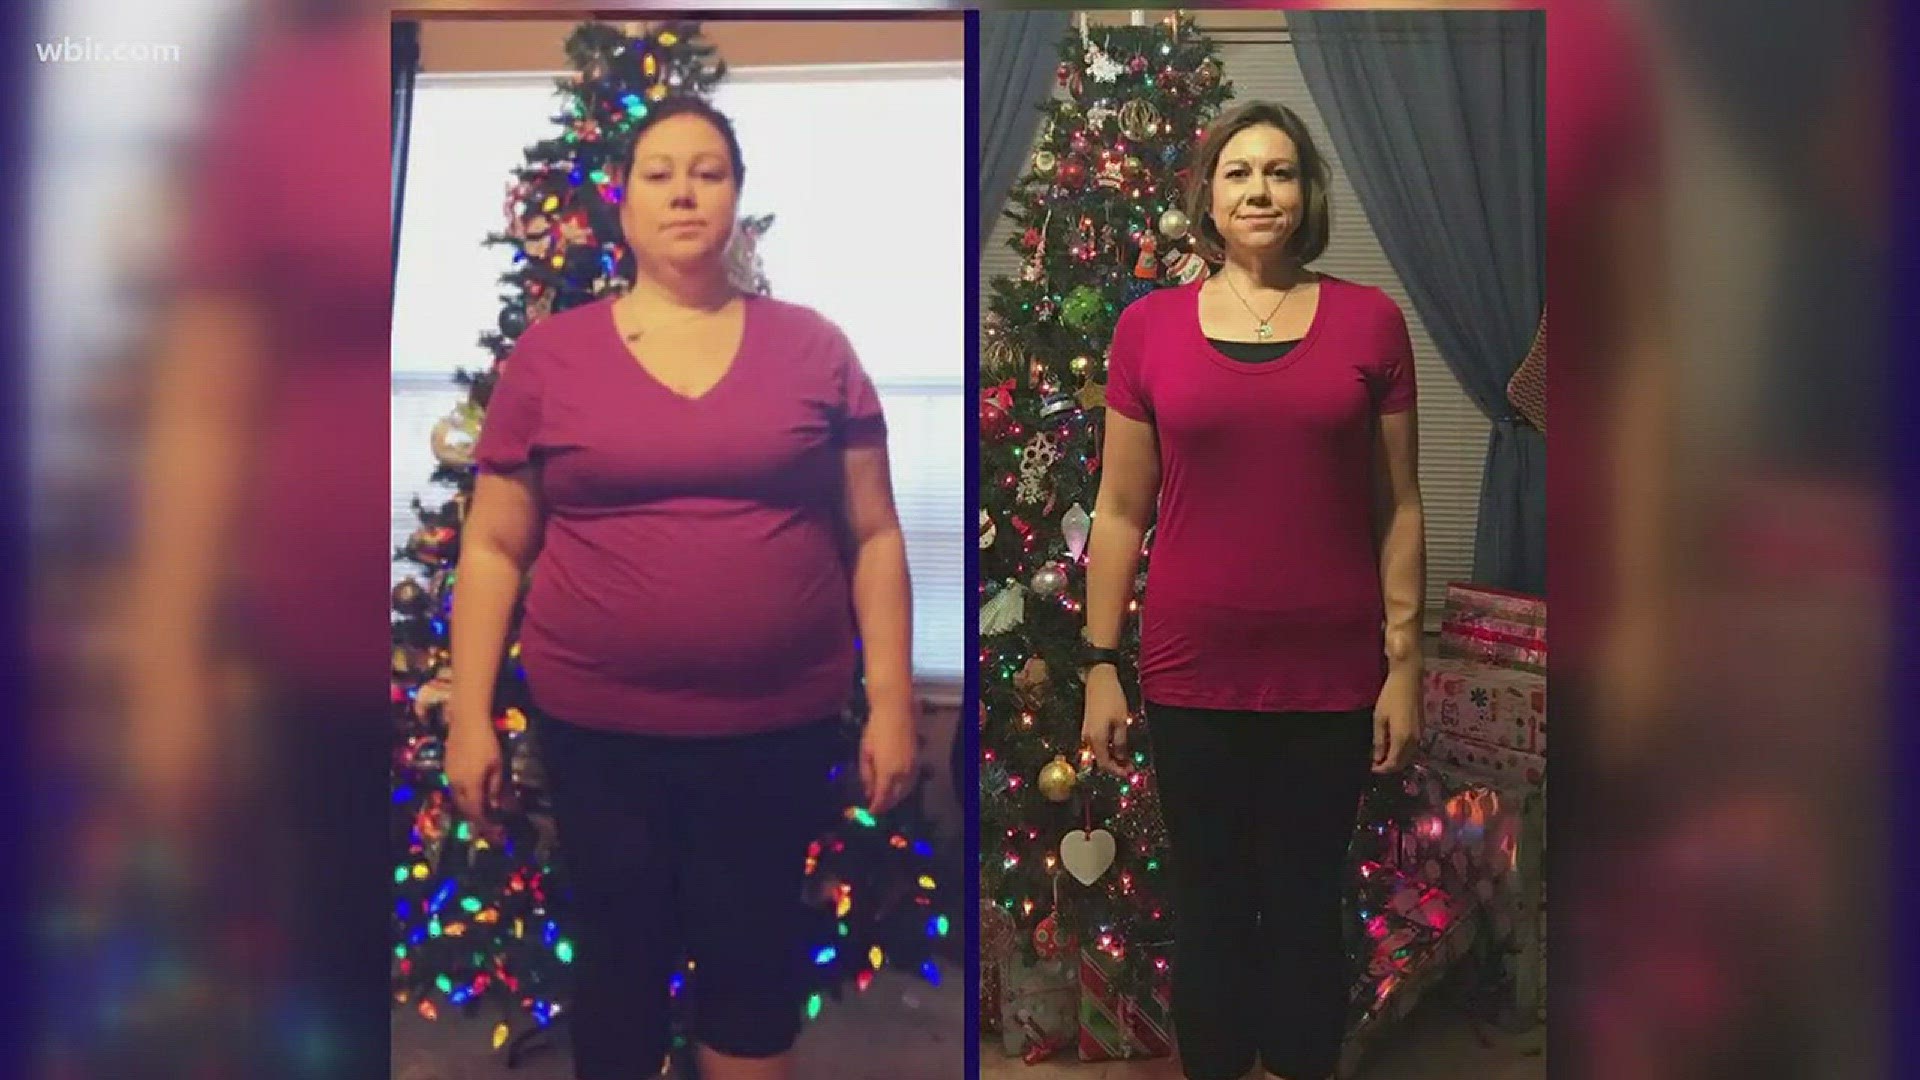 A local woman receives a kidney and that begins a journey of making better health choices. Those choices lead to a nearly 200 pound weight loss.January 2, 2018-4pm